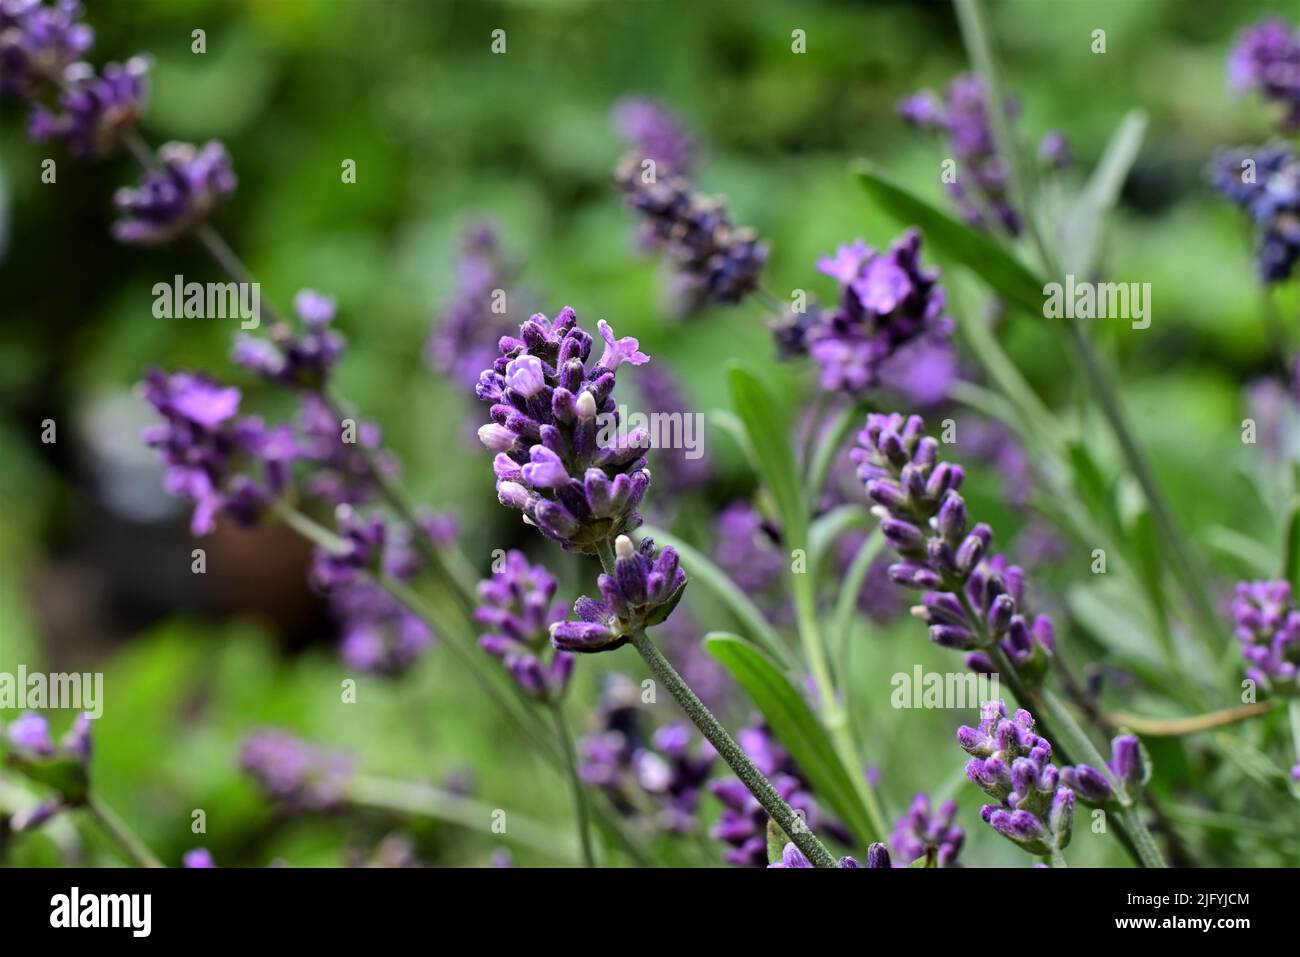 Flowering lavender against a blurred green background Stock Photo